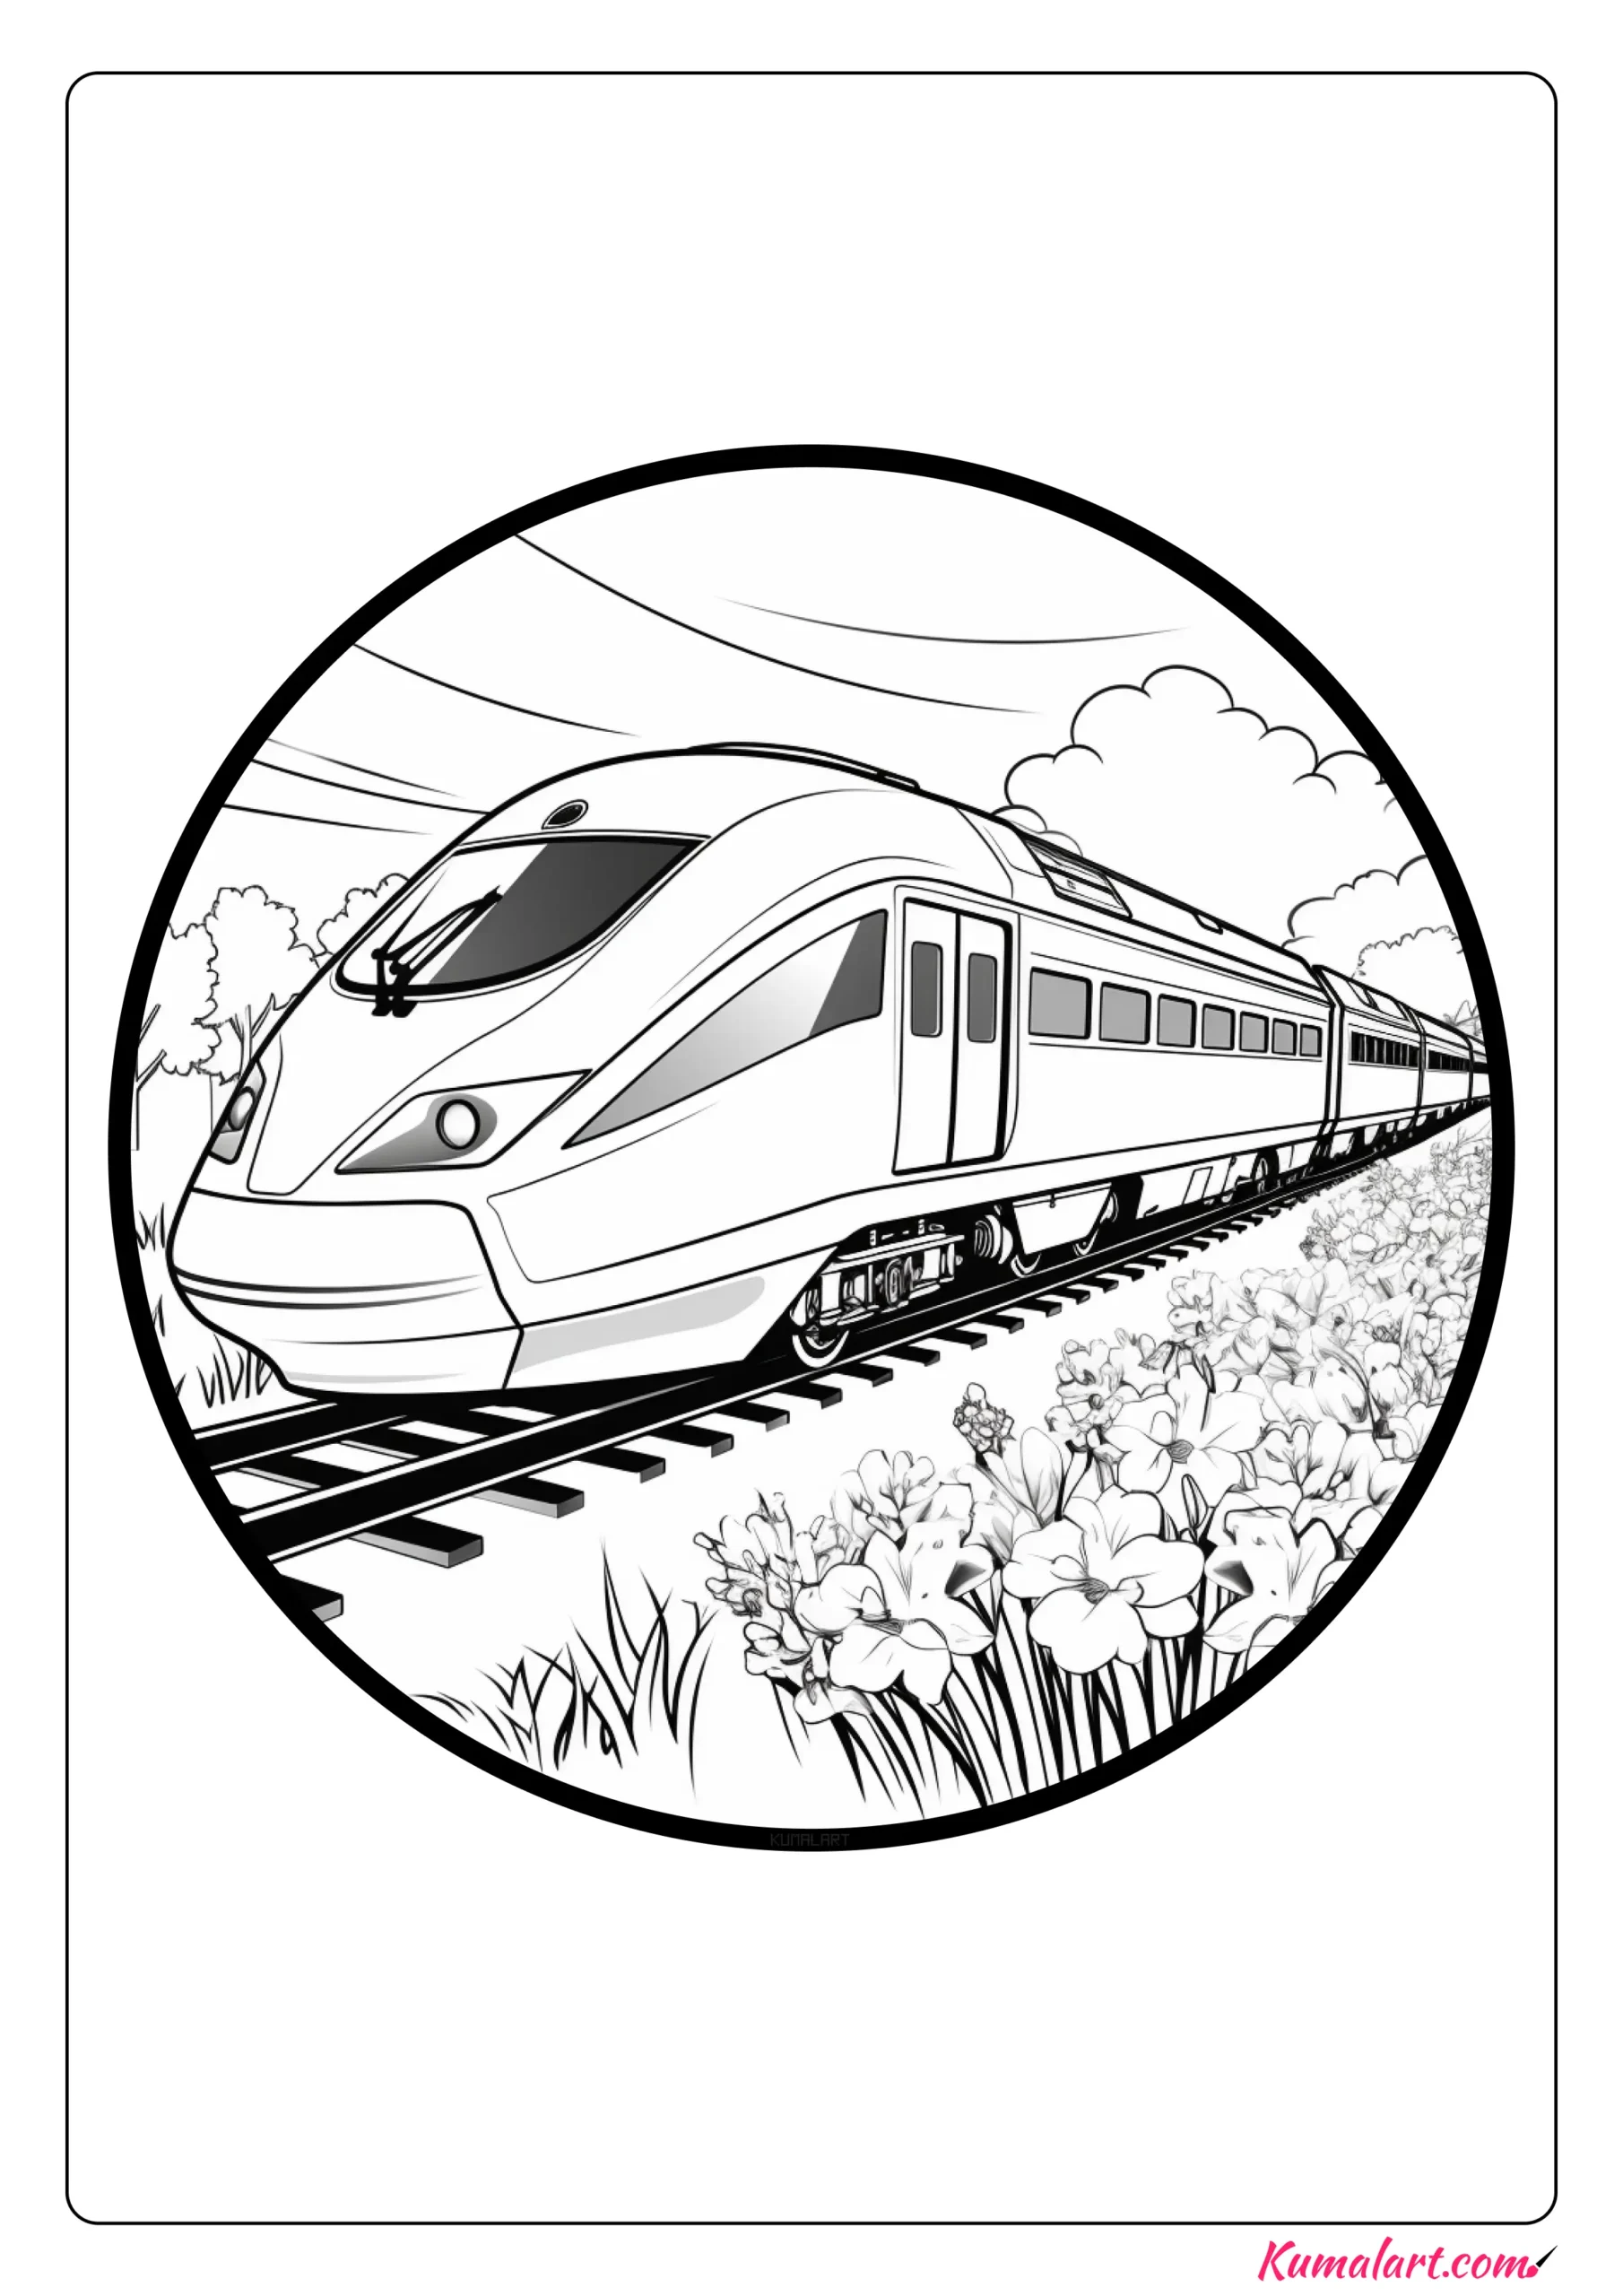 Accelerated Bullet Train Coloring Page